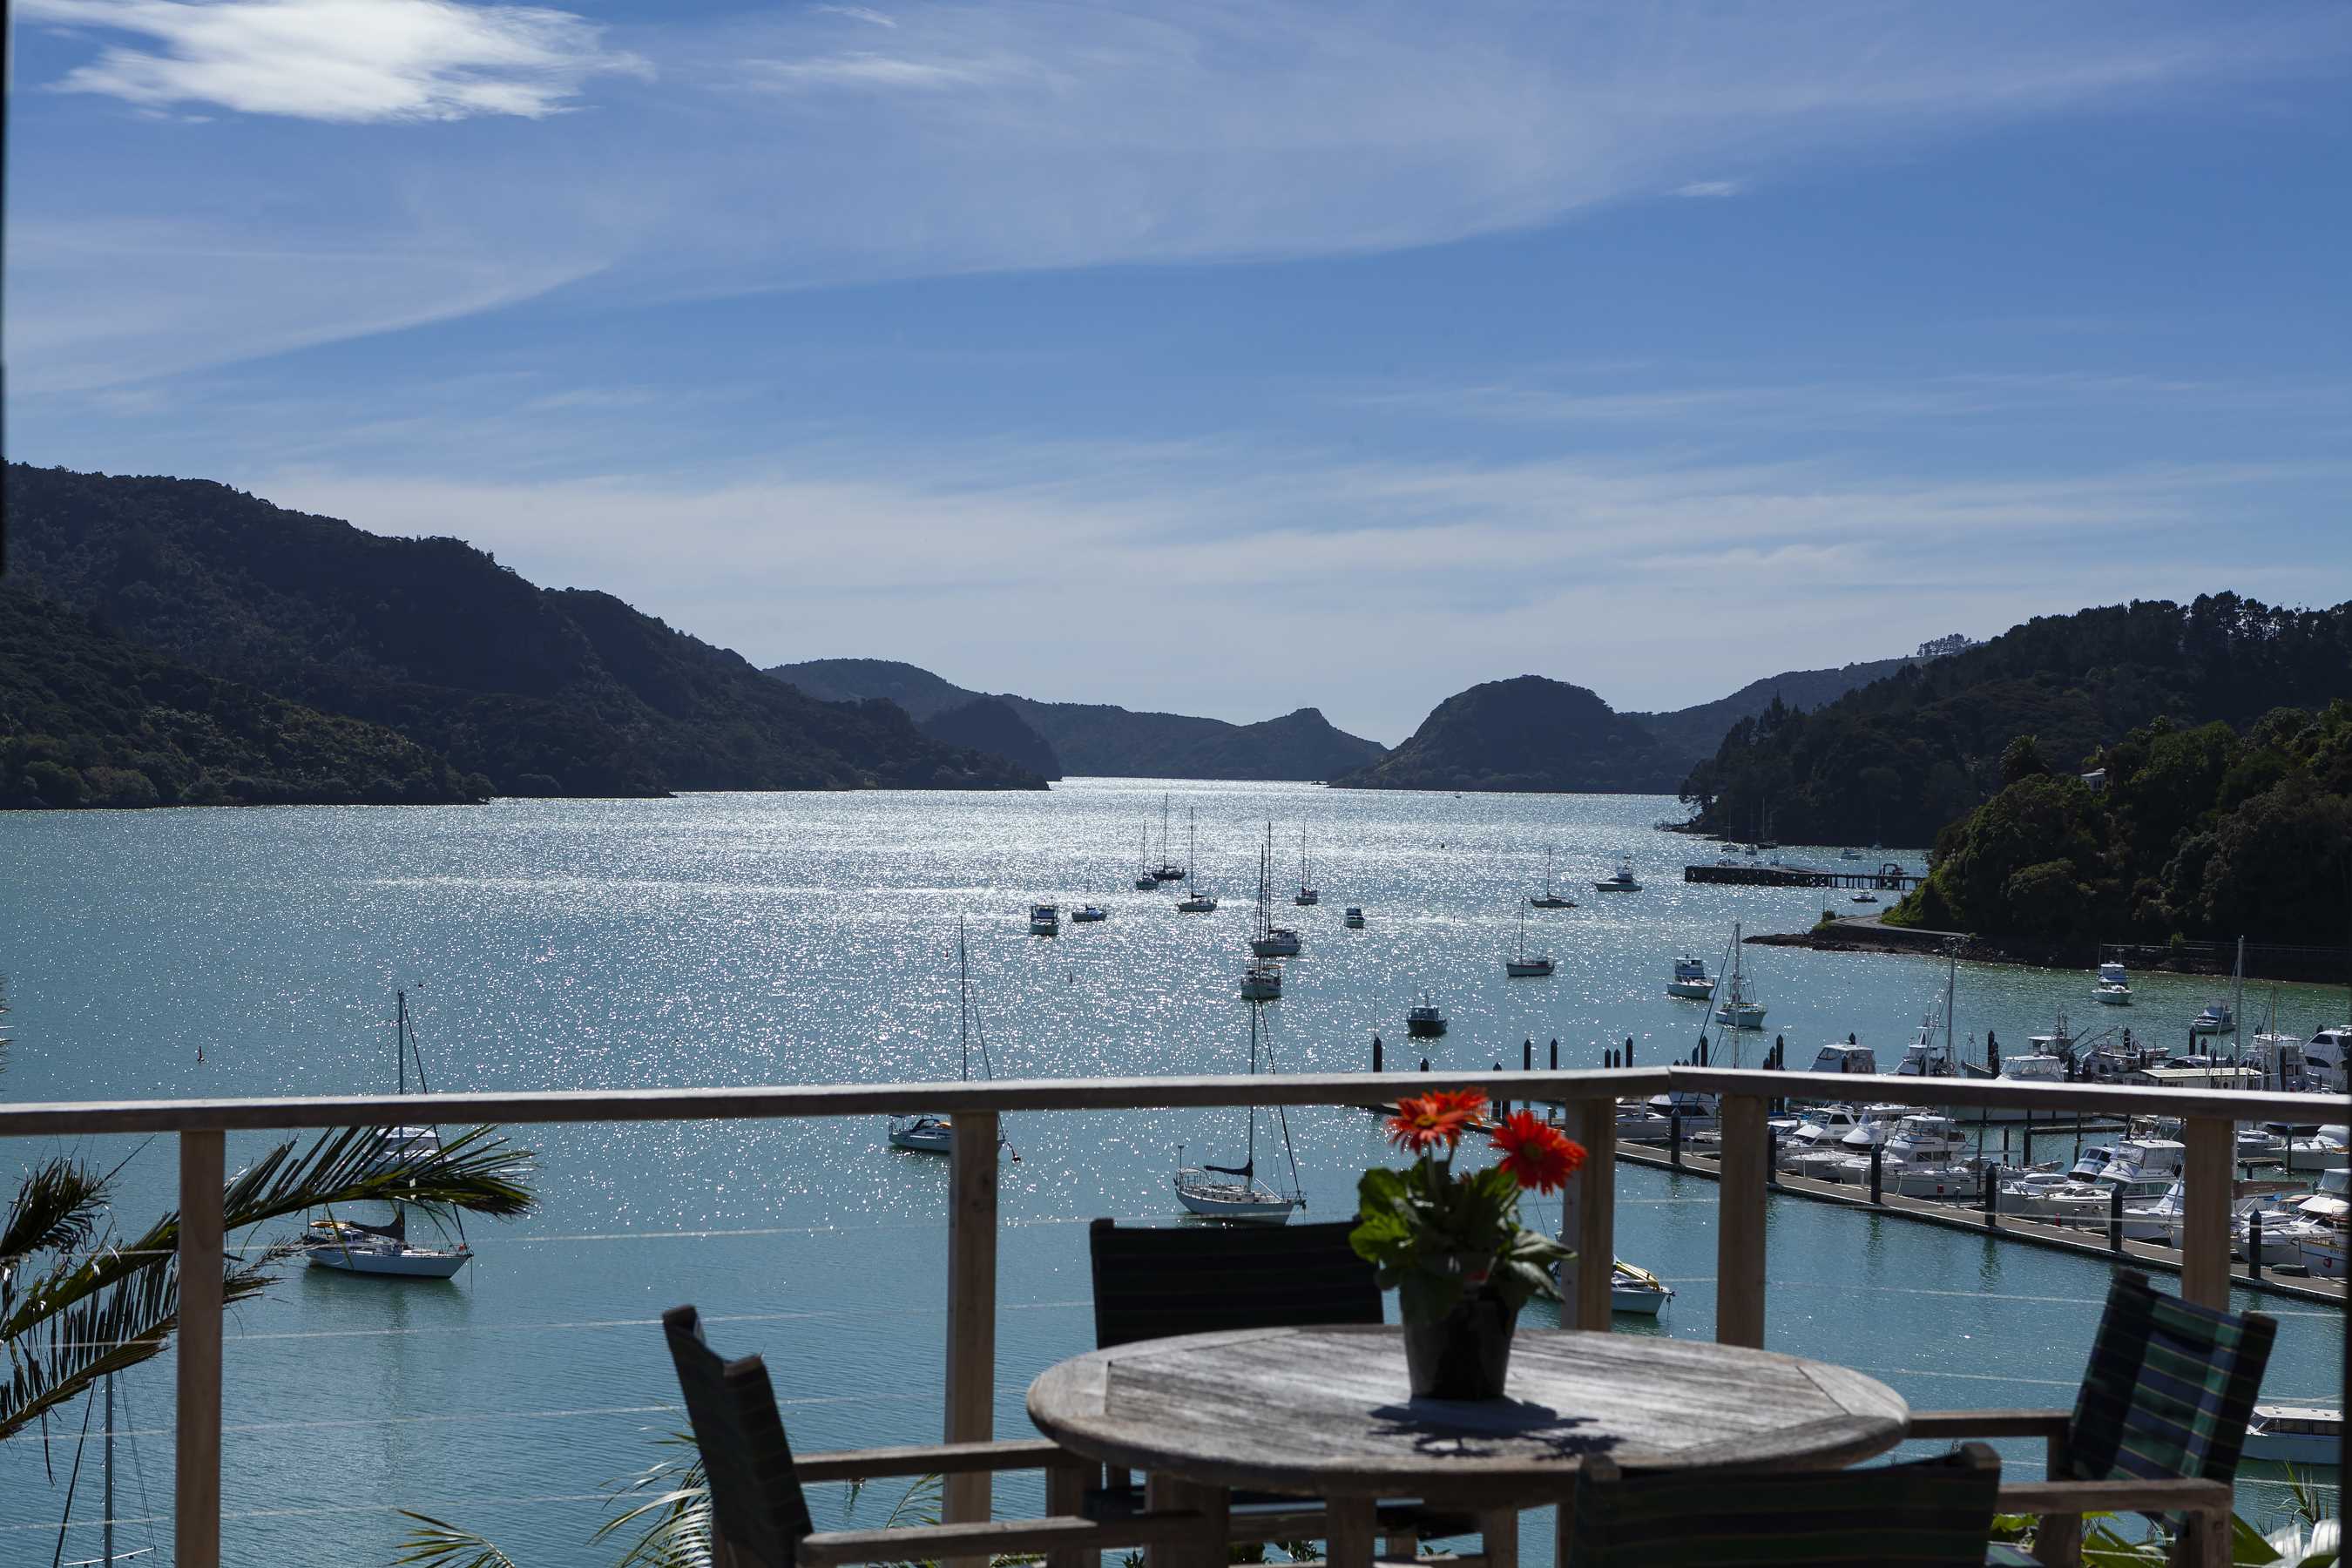 Real Estate For Sale Houses & Apartments : NORTH FACING, WATERFRONT, WHANGAROA